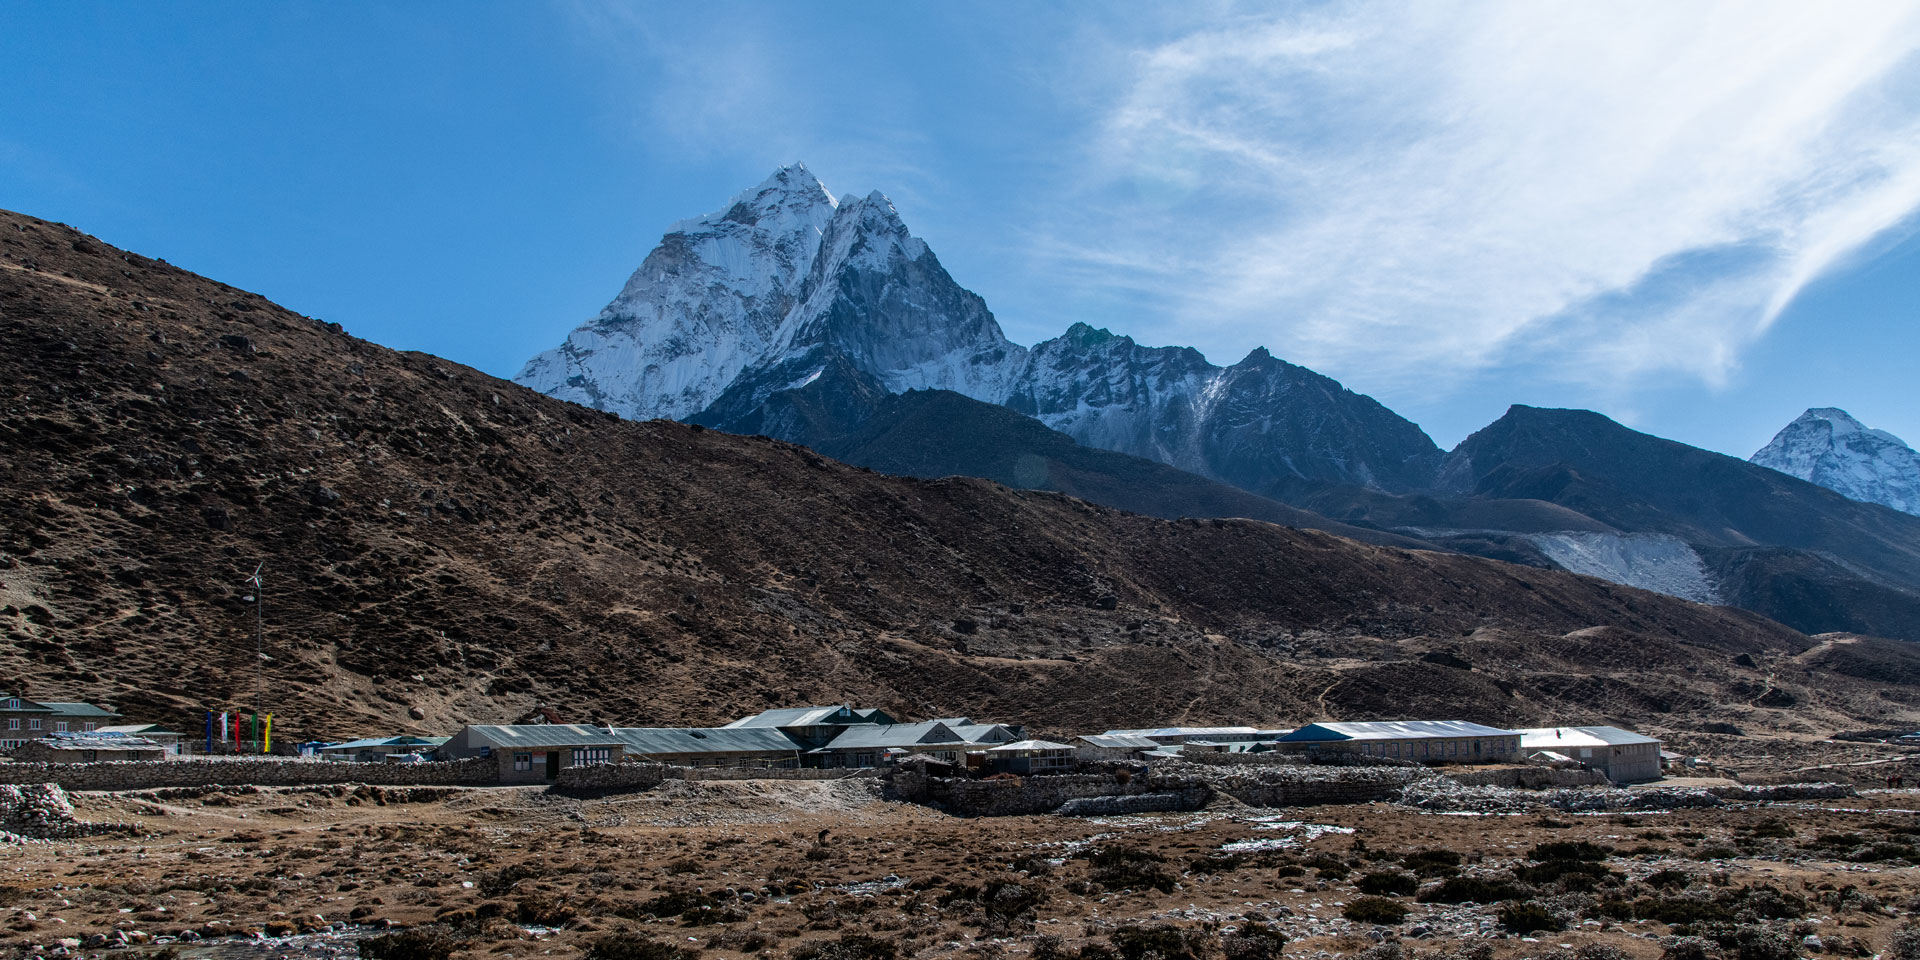 Ama Dablam towers over Periche village in the Khumbu region of Nepal